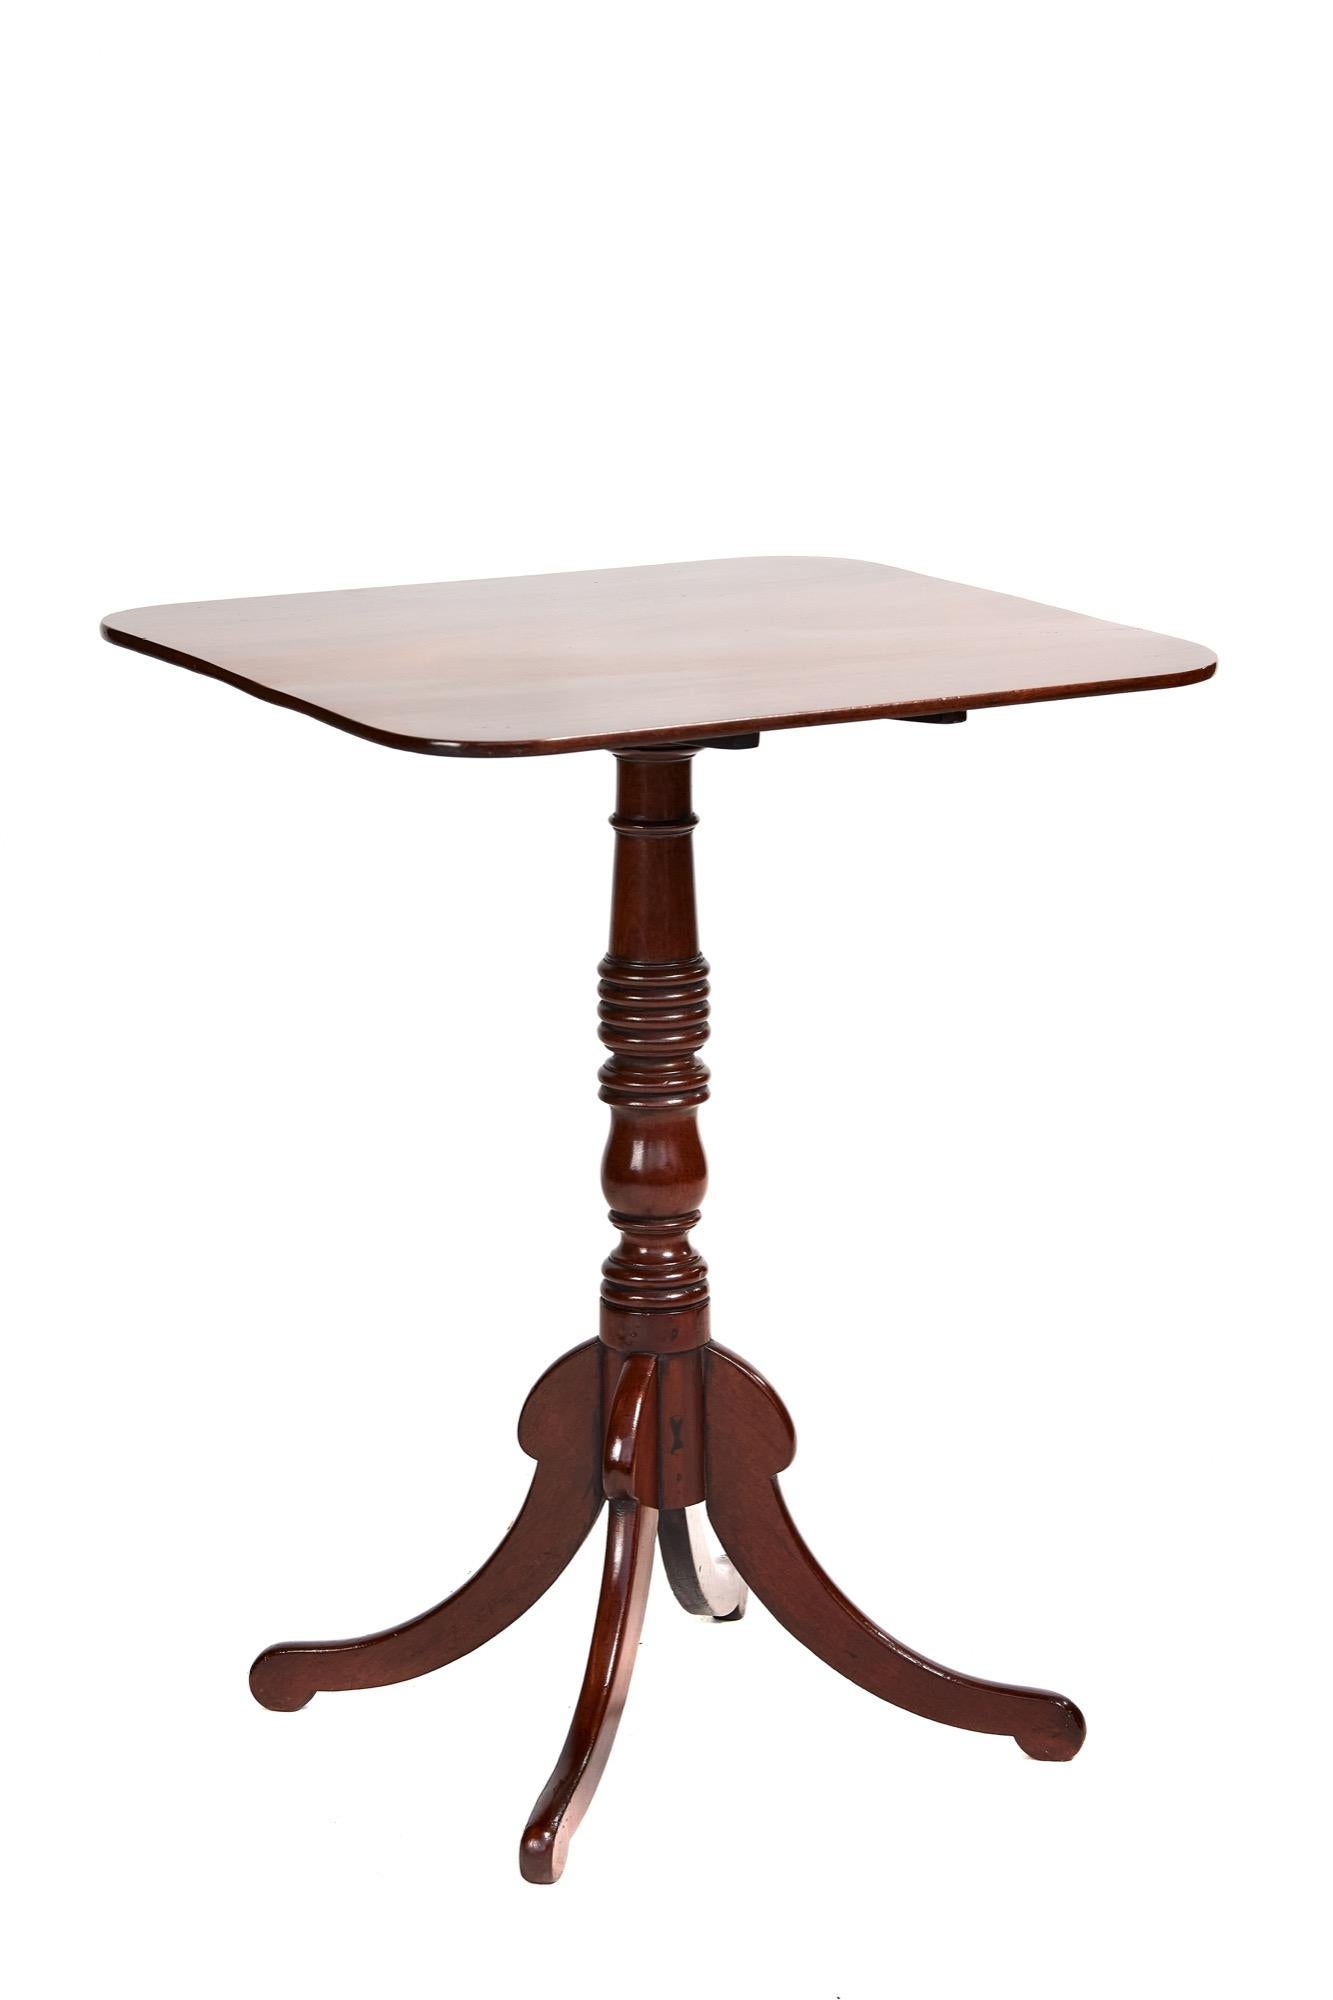 Antique Regency square mahogany tilt top table having a fantastic square mahogany top with very desirable aged patination and color, elegant turned mahogany column and terminating in four mahogany shaped splayed legs.

A terrific original example in